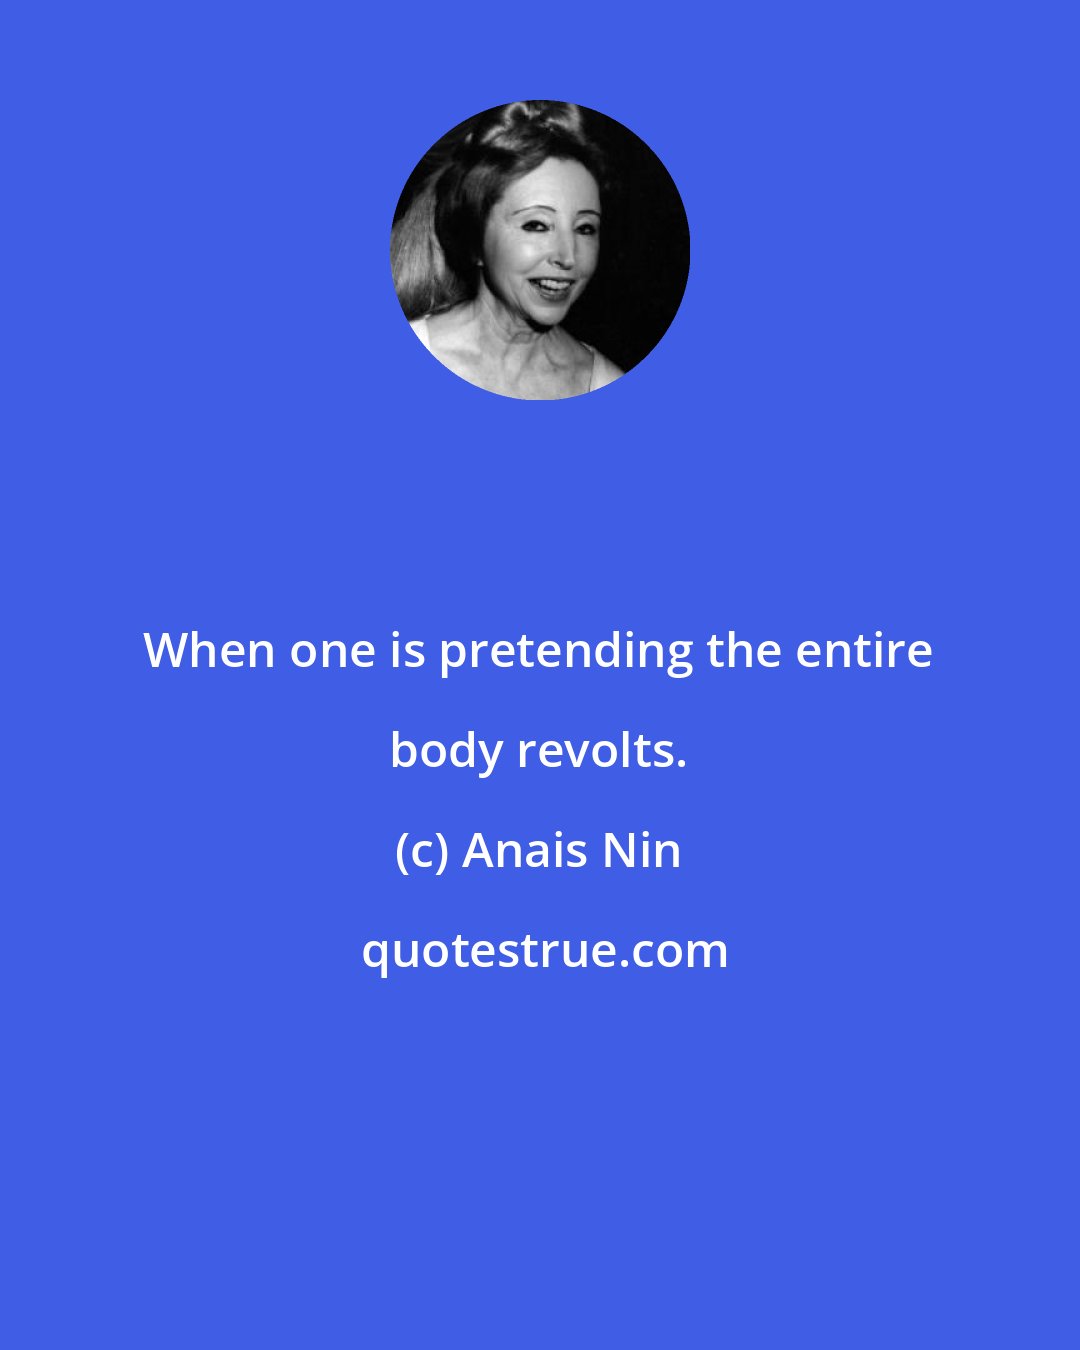 Anais Nin: When one is pretending the entire body revolts.